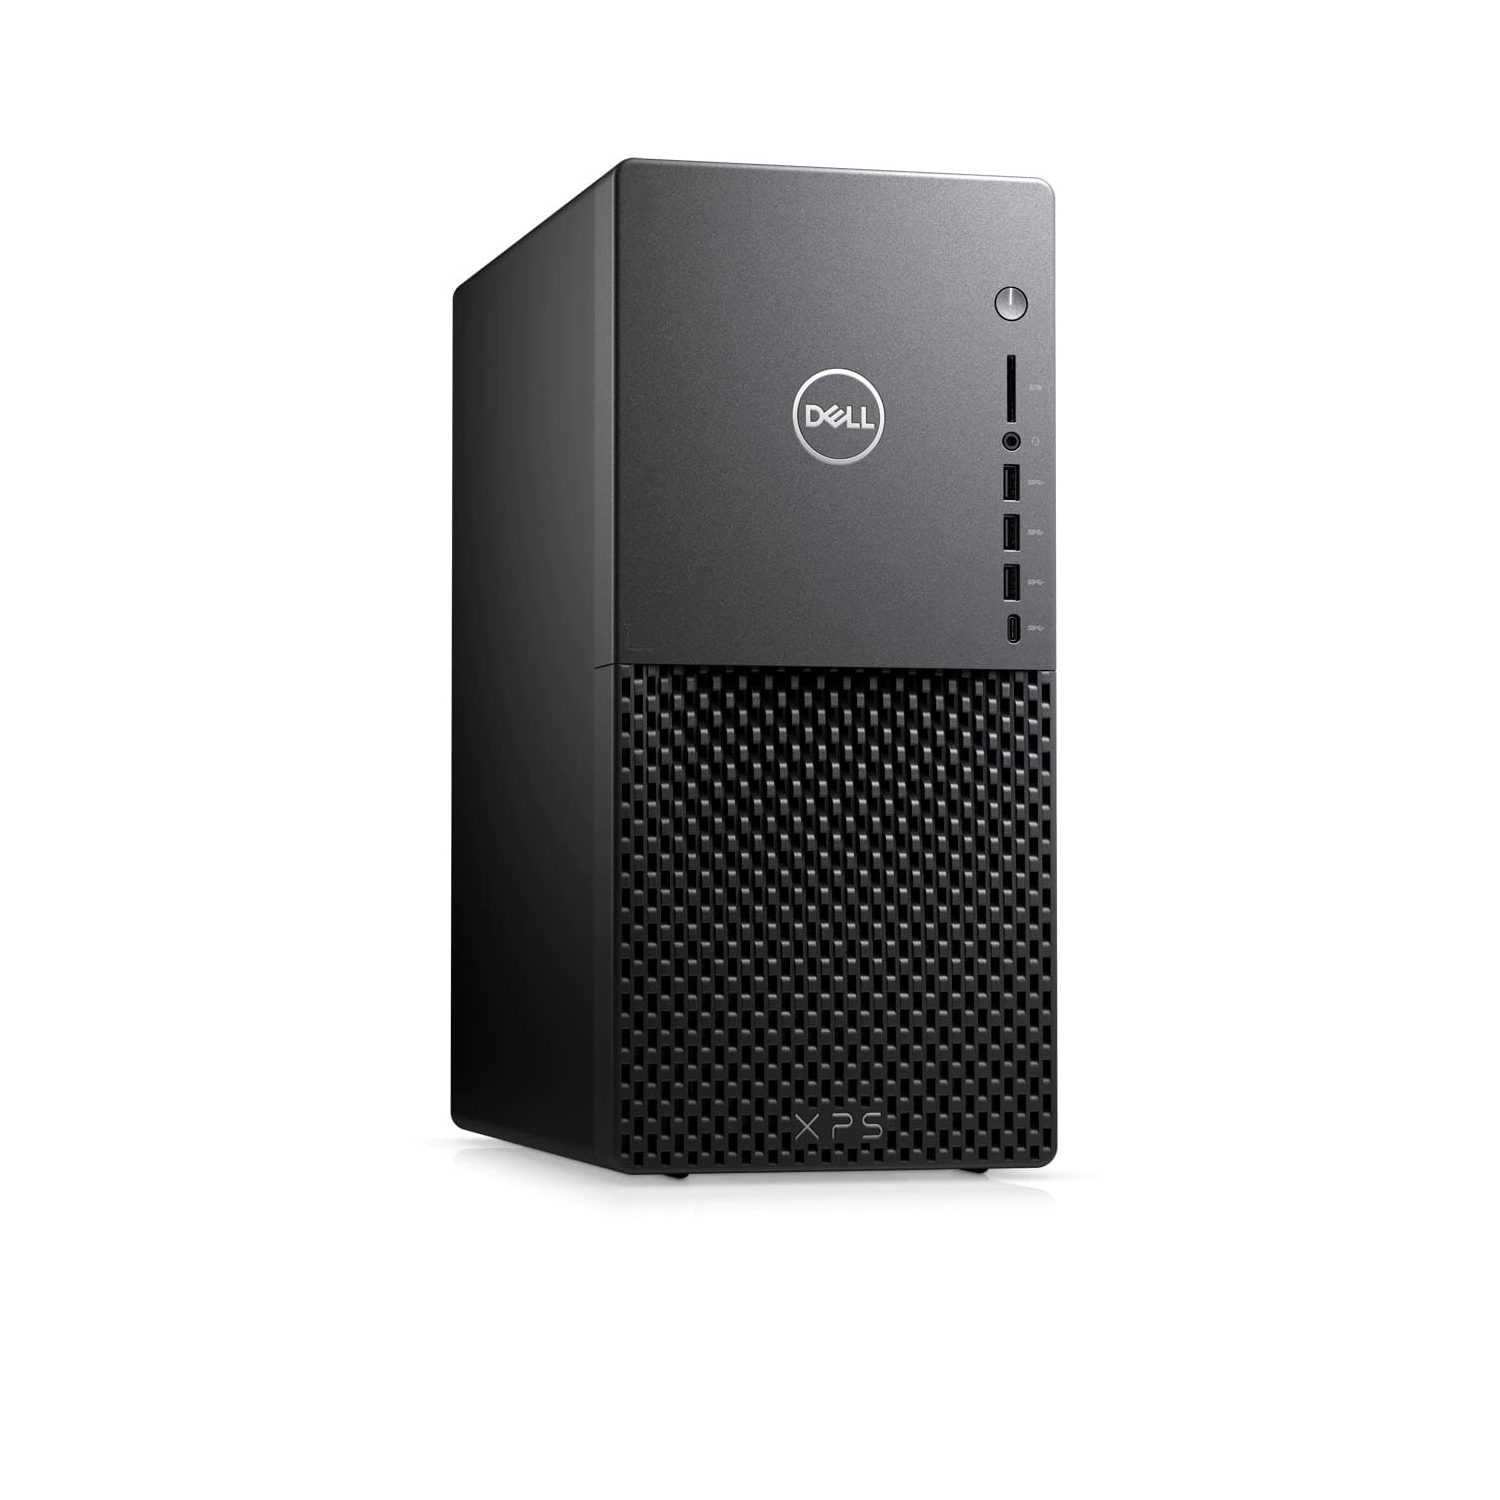 Refurbished (Excellent) - Dell XPS 8940 Desktop (2020) | Core i7 - 1TB HDD + 512GB SSD - 16GB RAM - RX 5700 | 8 Cores @ 4.9 GHz - 11th Gen CPU Certified Refurbished